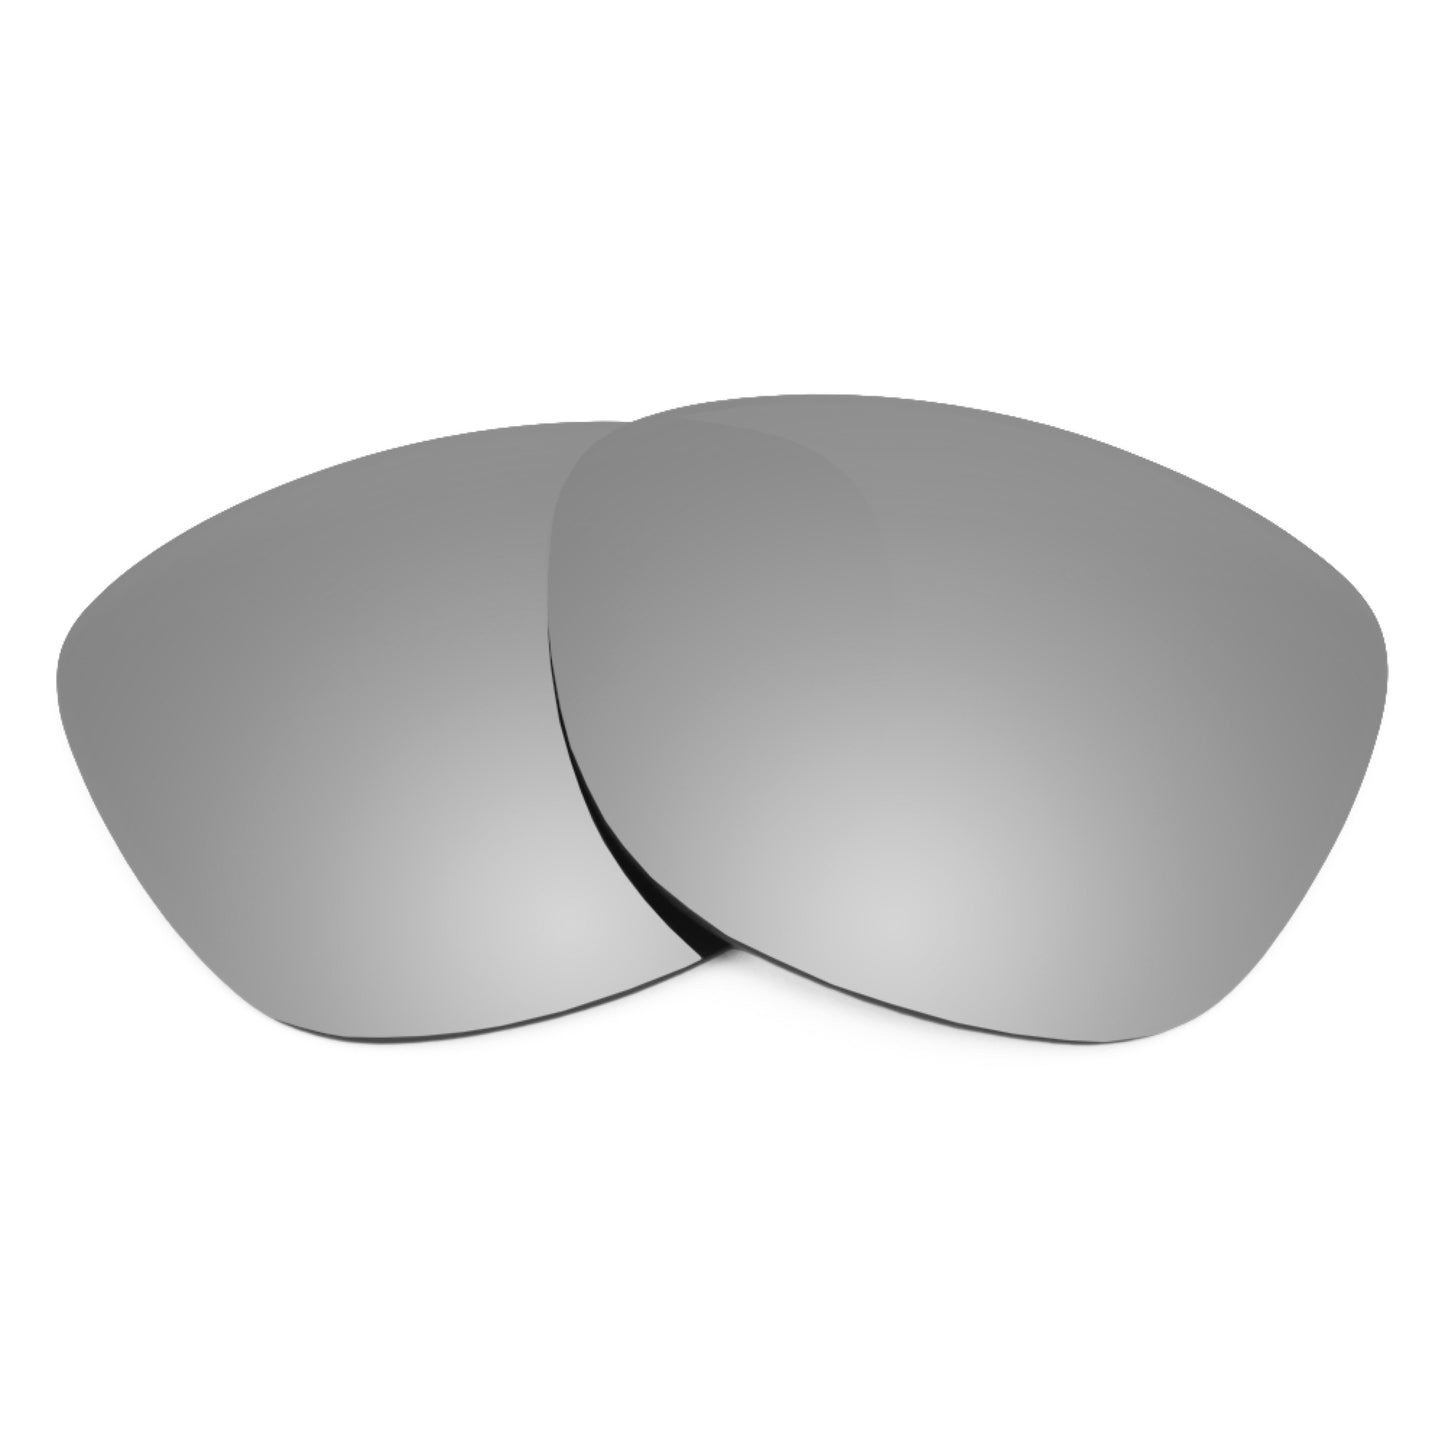 Revant replacement lenses for Ray-Ban Justin Classic RB4165 55mm Non-Polarized Titanium